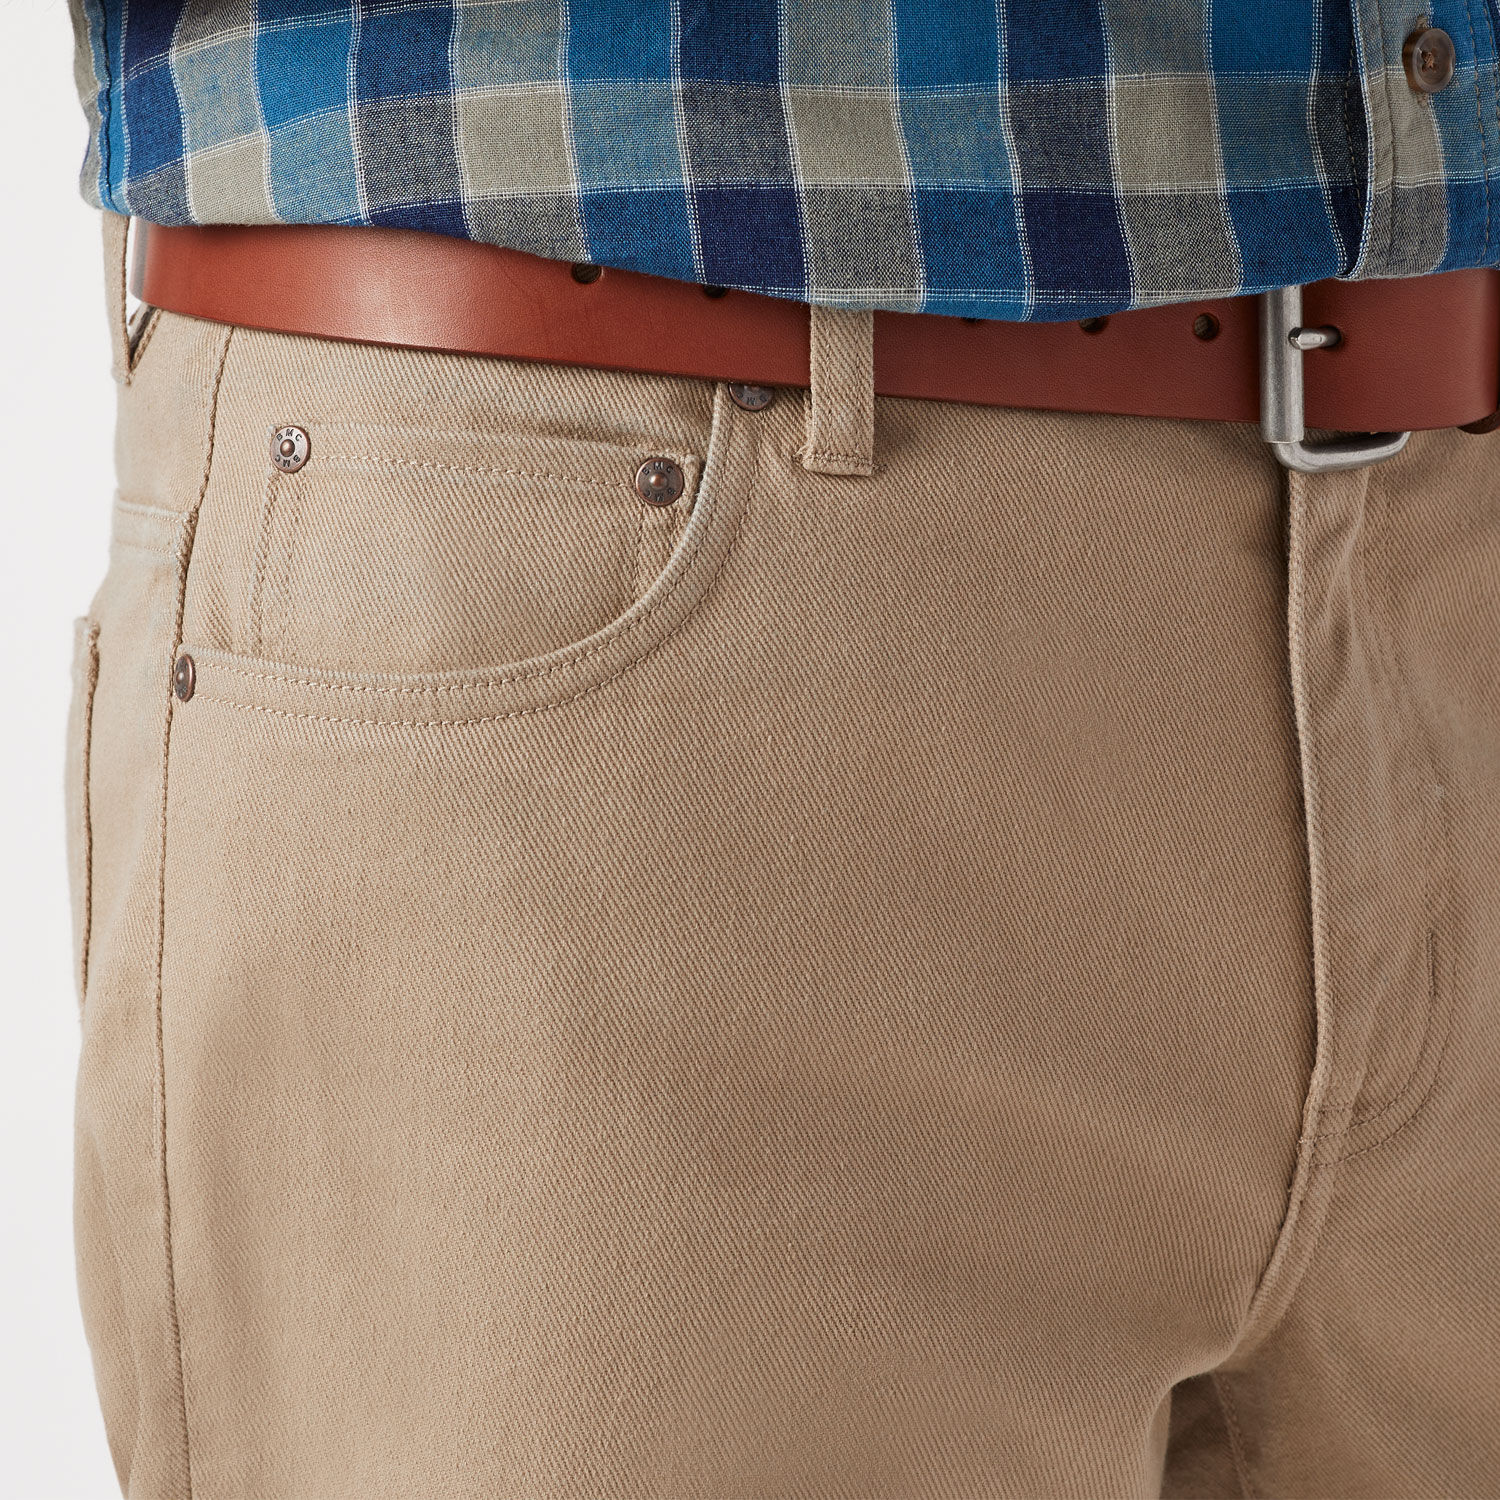 Thomson Twill Pants - Cement | All American Clothing Co